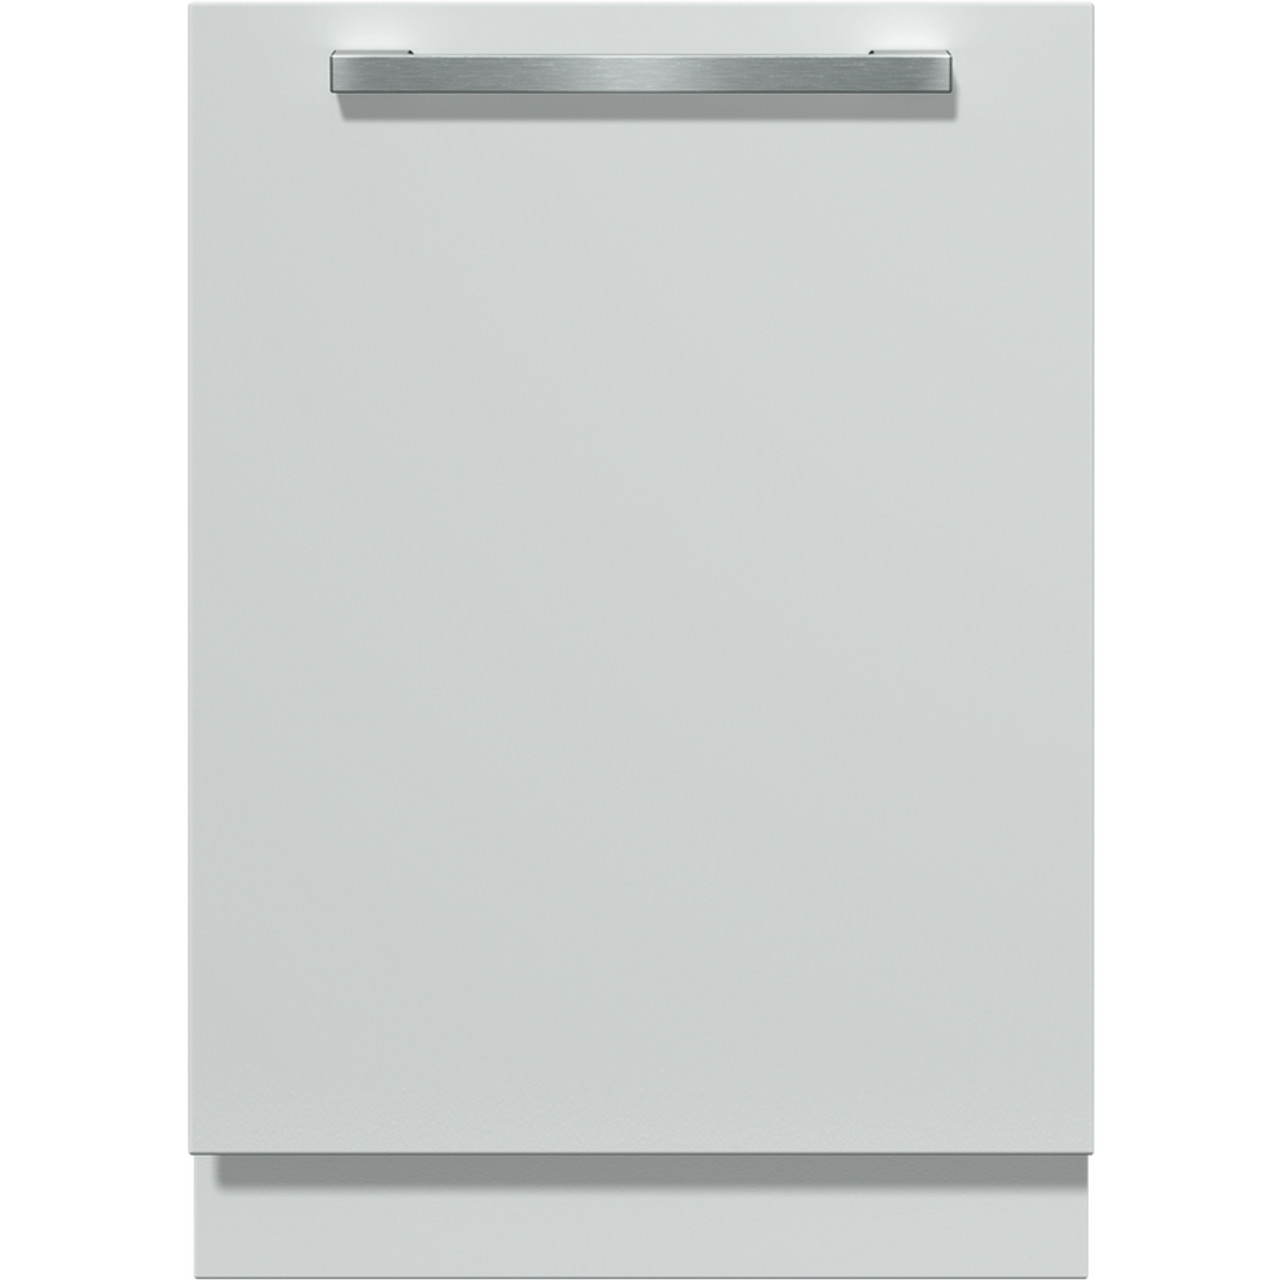 Generation 7000 Xxl Fully Integrated Dishwasher With Autodos 